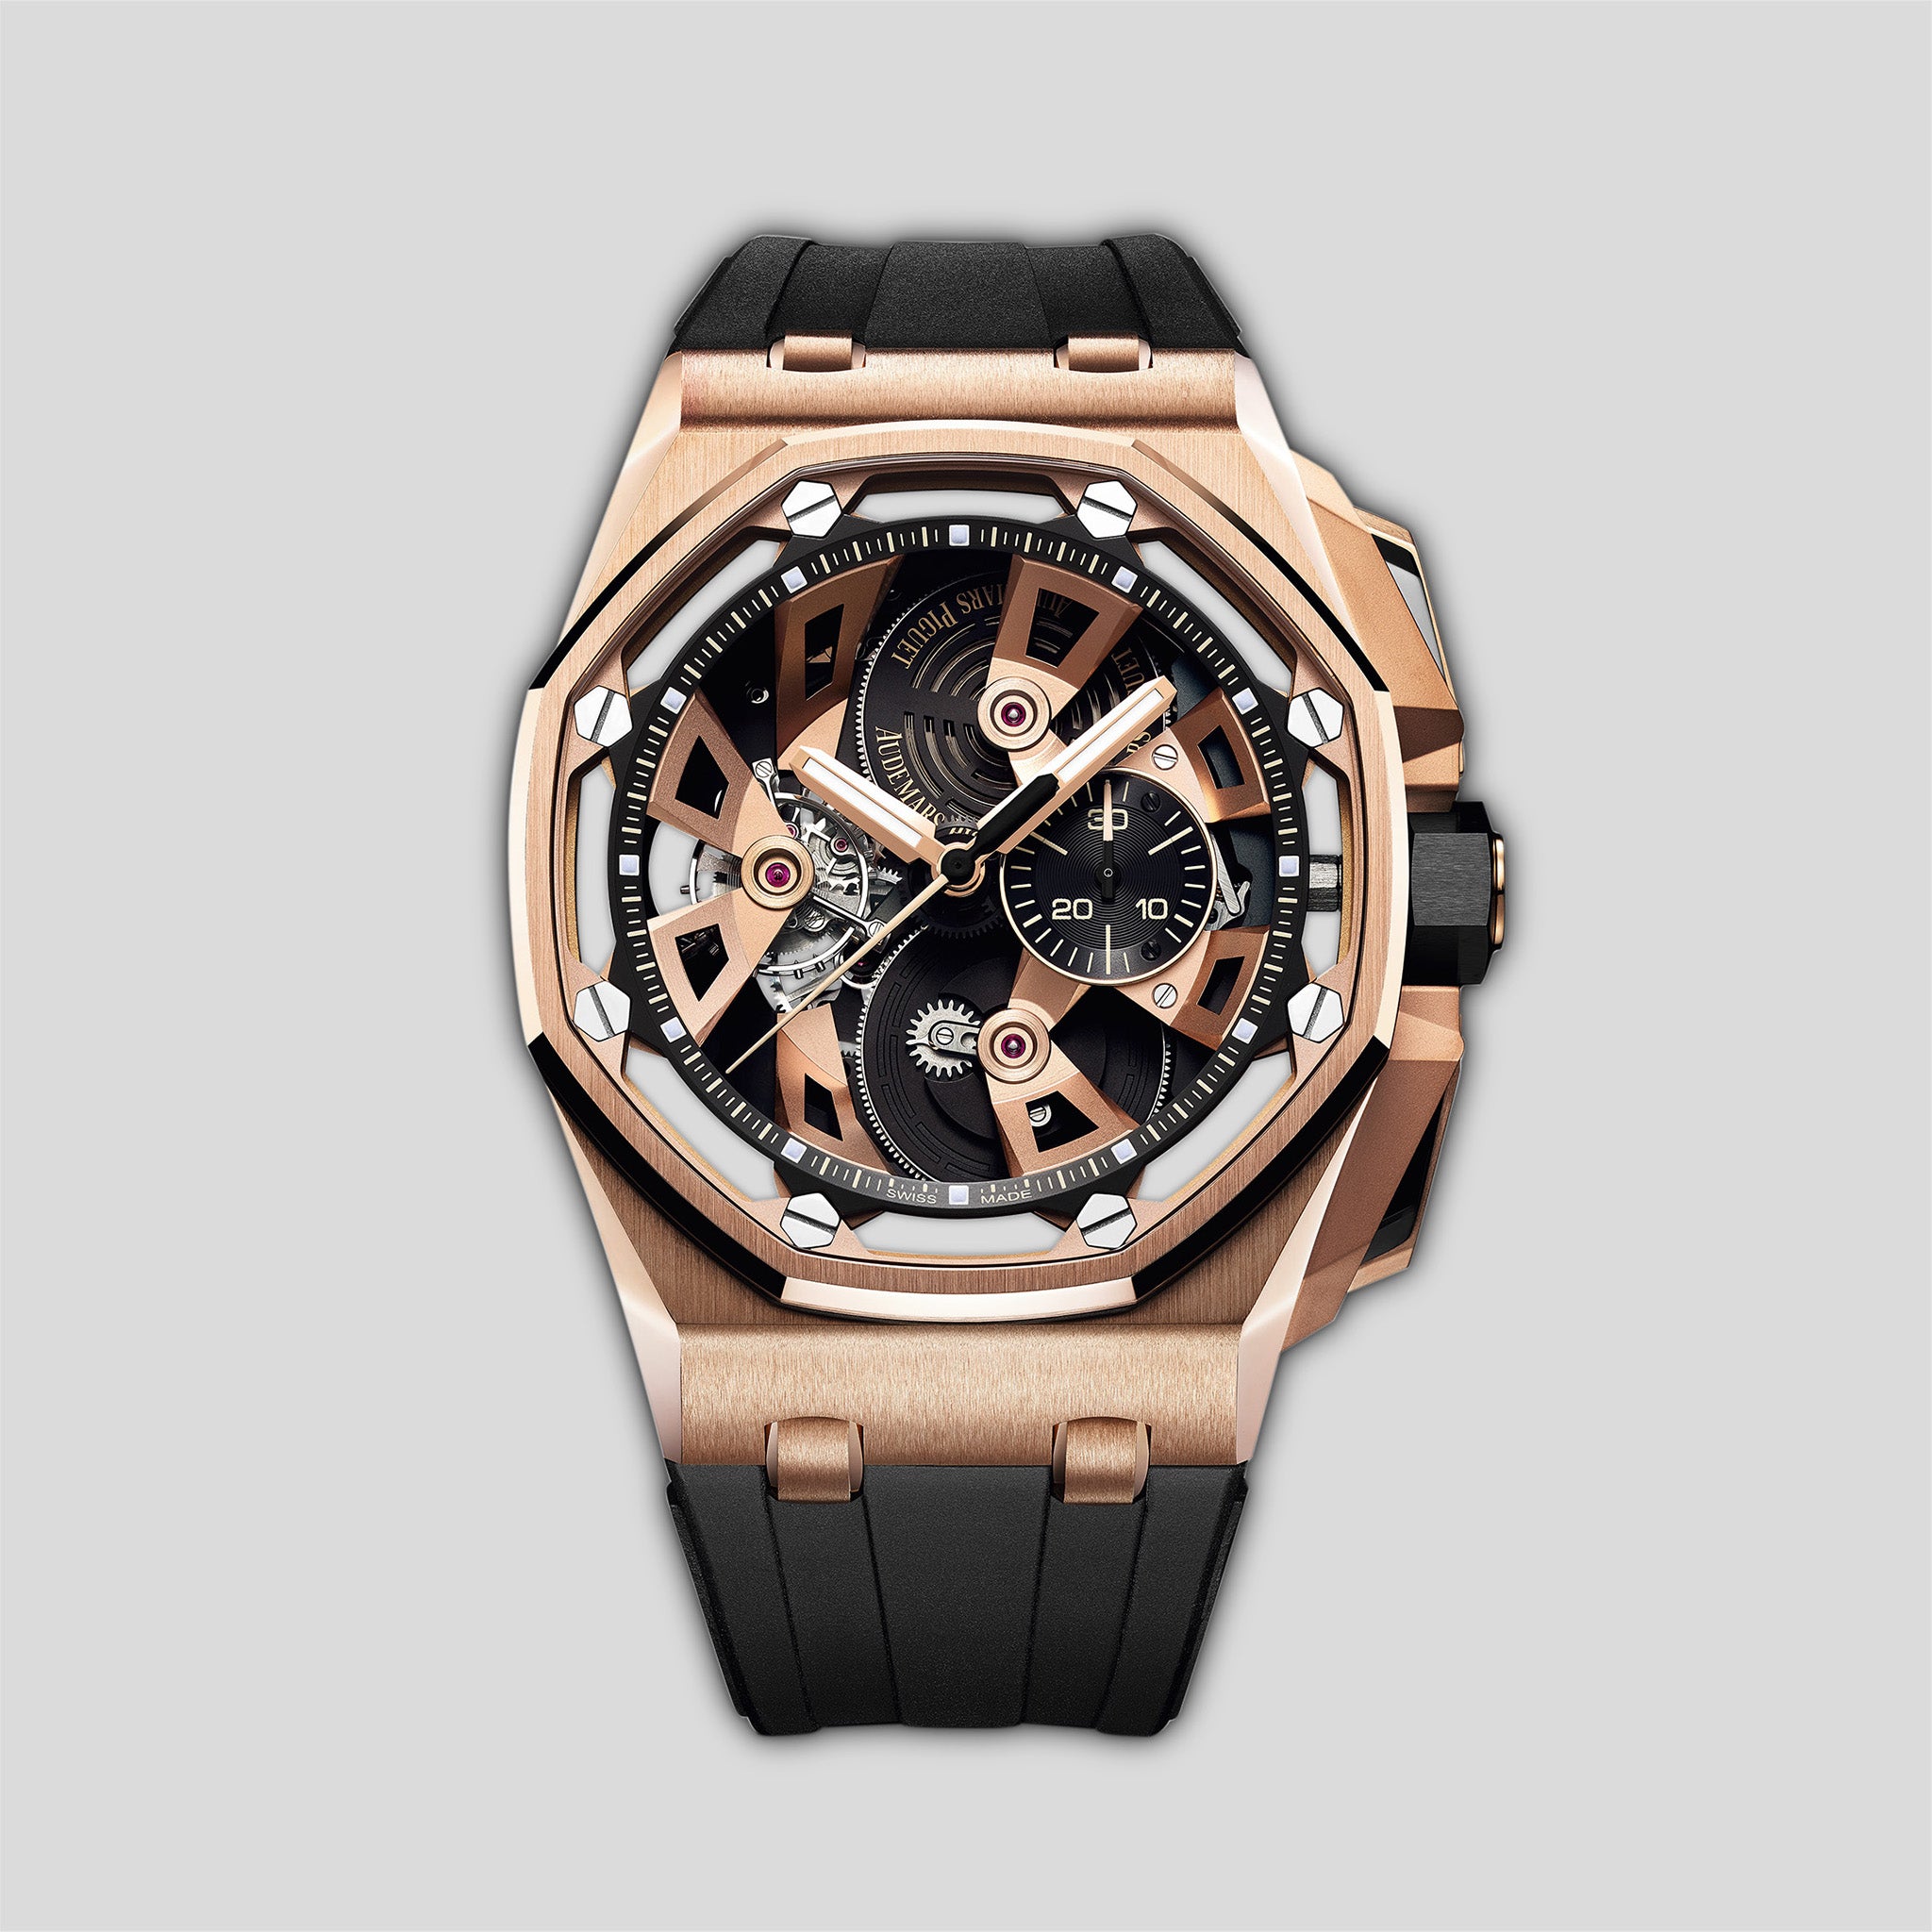 Royal Oak Offshore 44mm pink gold Tourbillon 26421OR.OO.A002CA.01